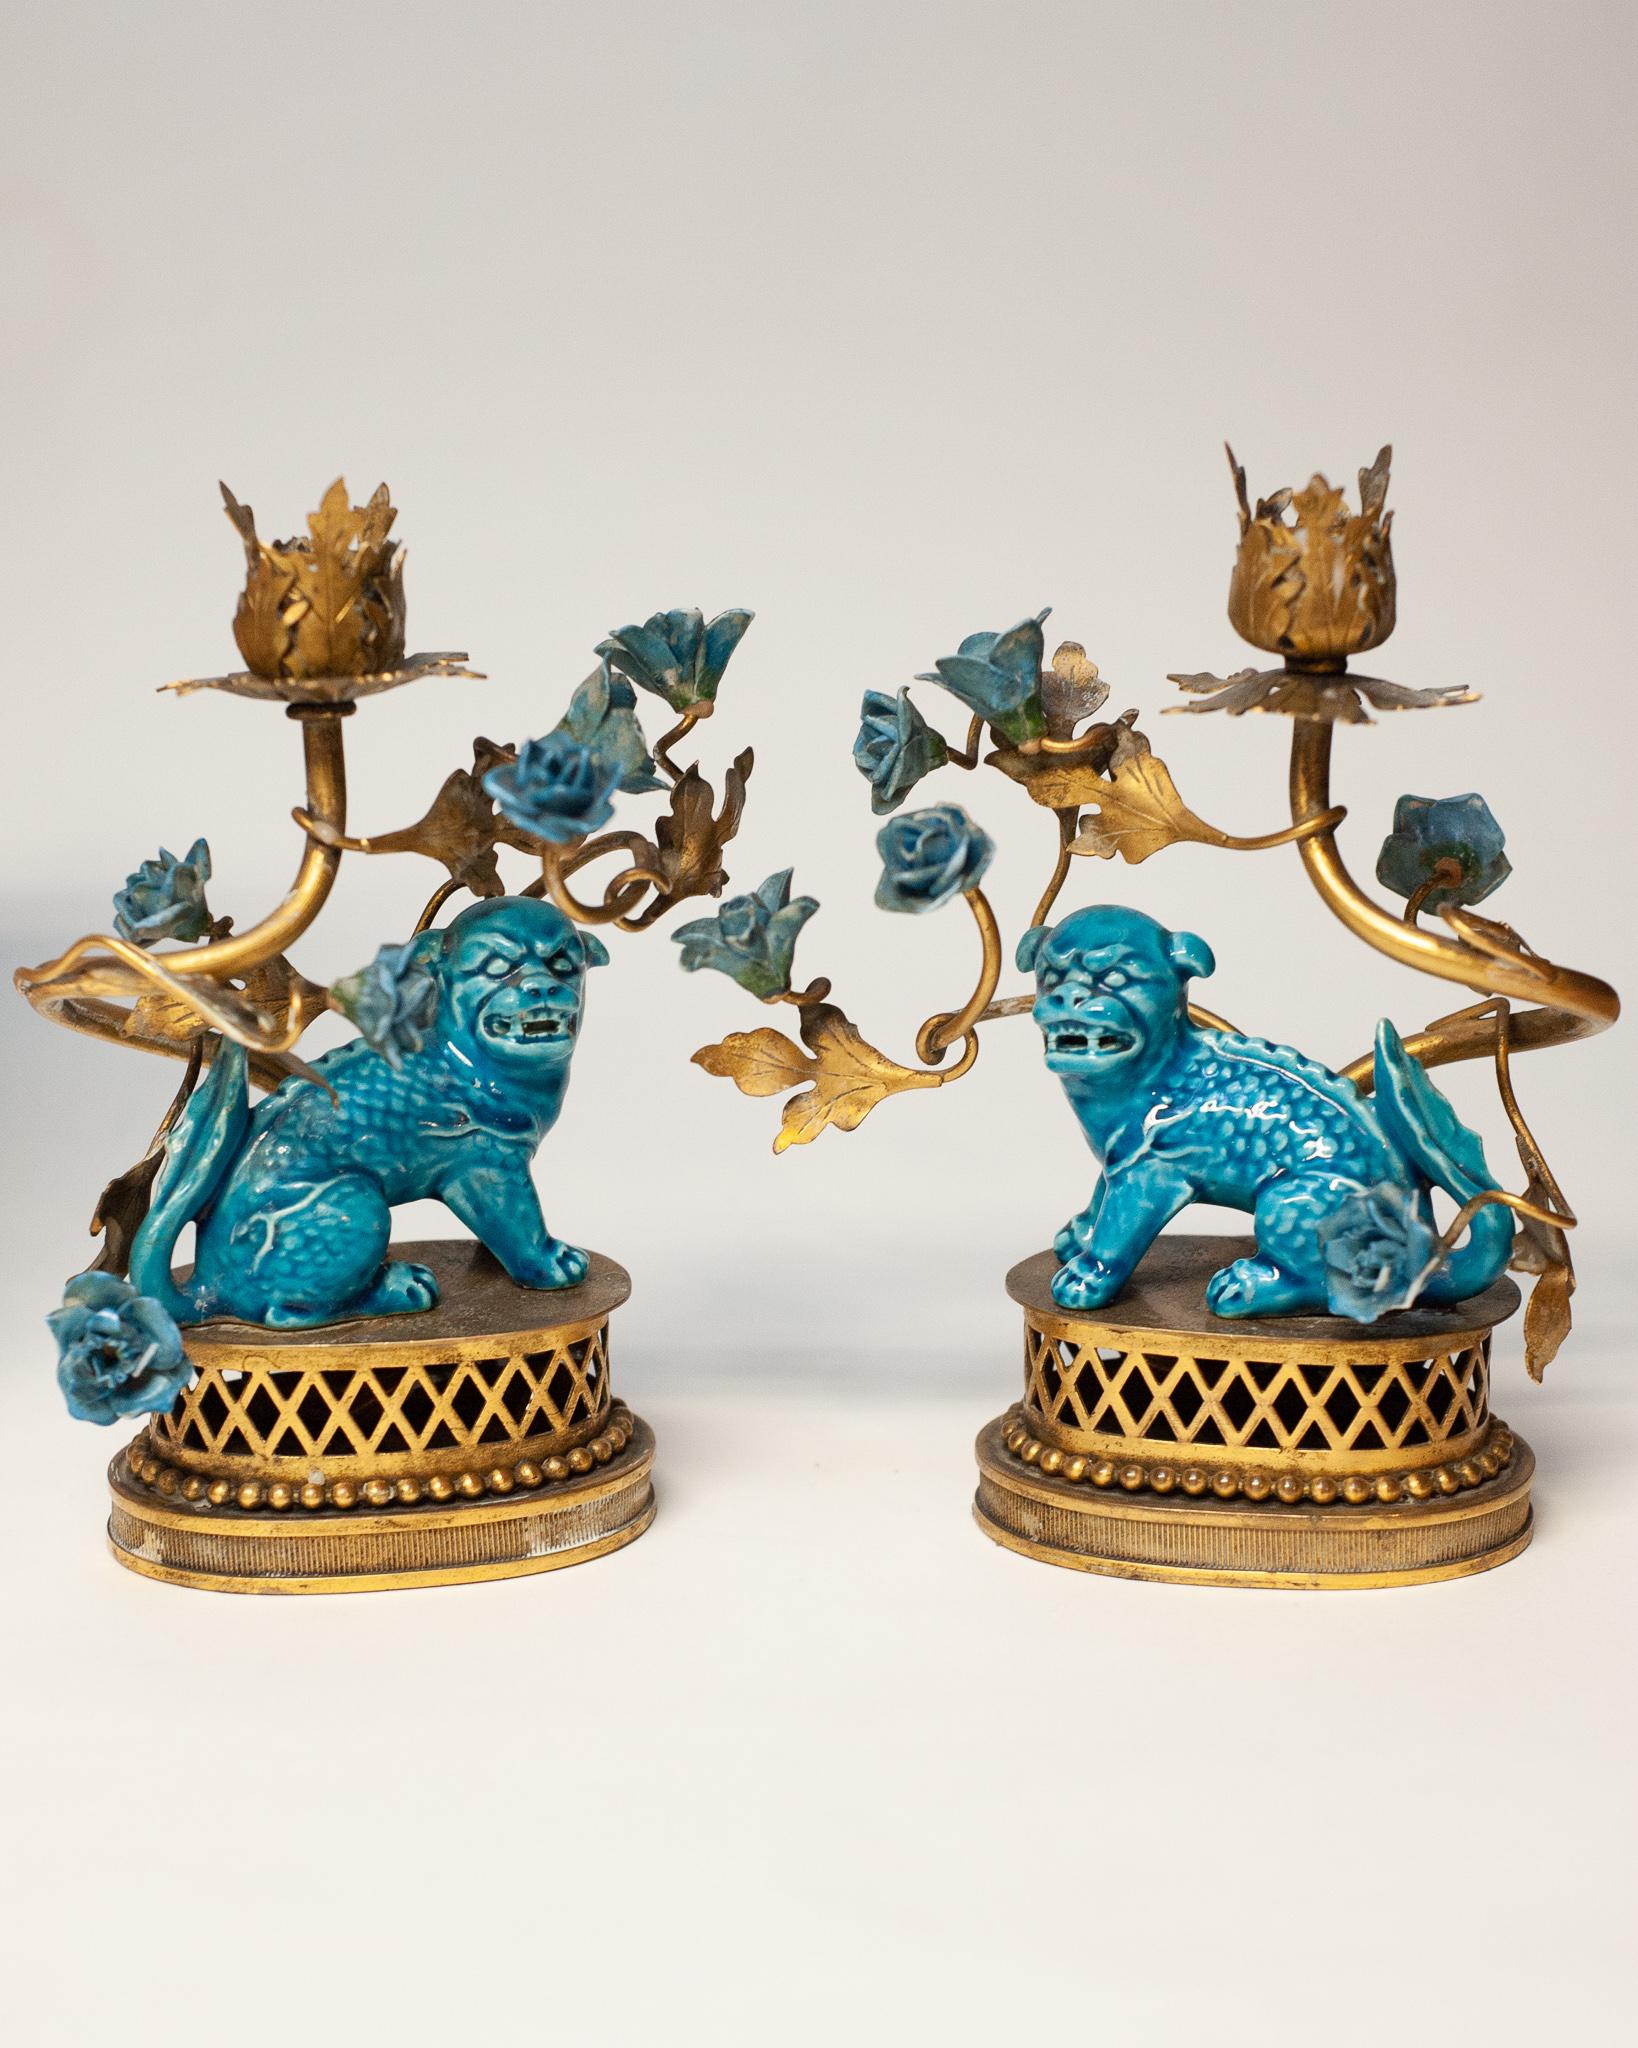 A stunning pair of French antique foo fu dog candlesticks or lamp bases, glazed in a bright turquoise. This pair may be unwired and rewired for use as lamps, or used to hold candles. Porcelain Foo Dogs and porcelain flowers with brass bases, leaves